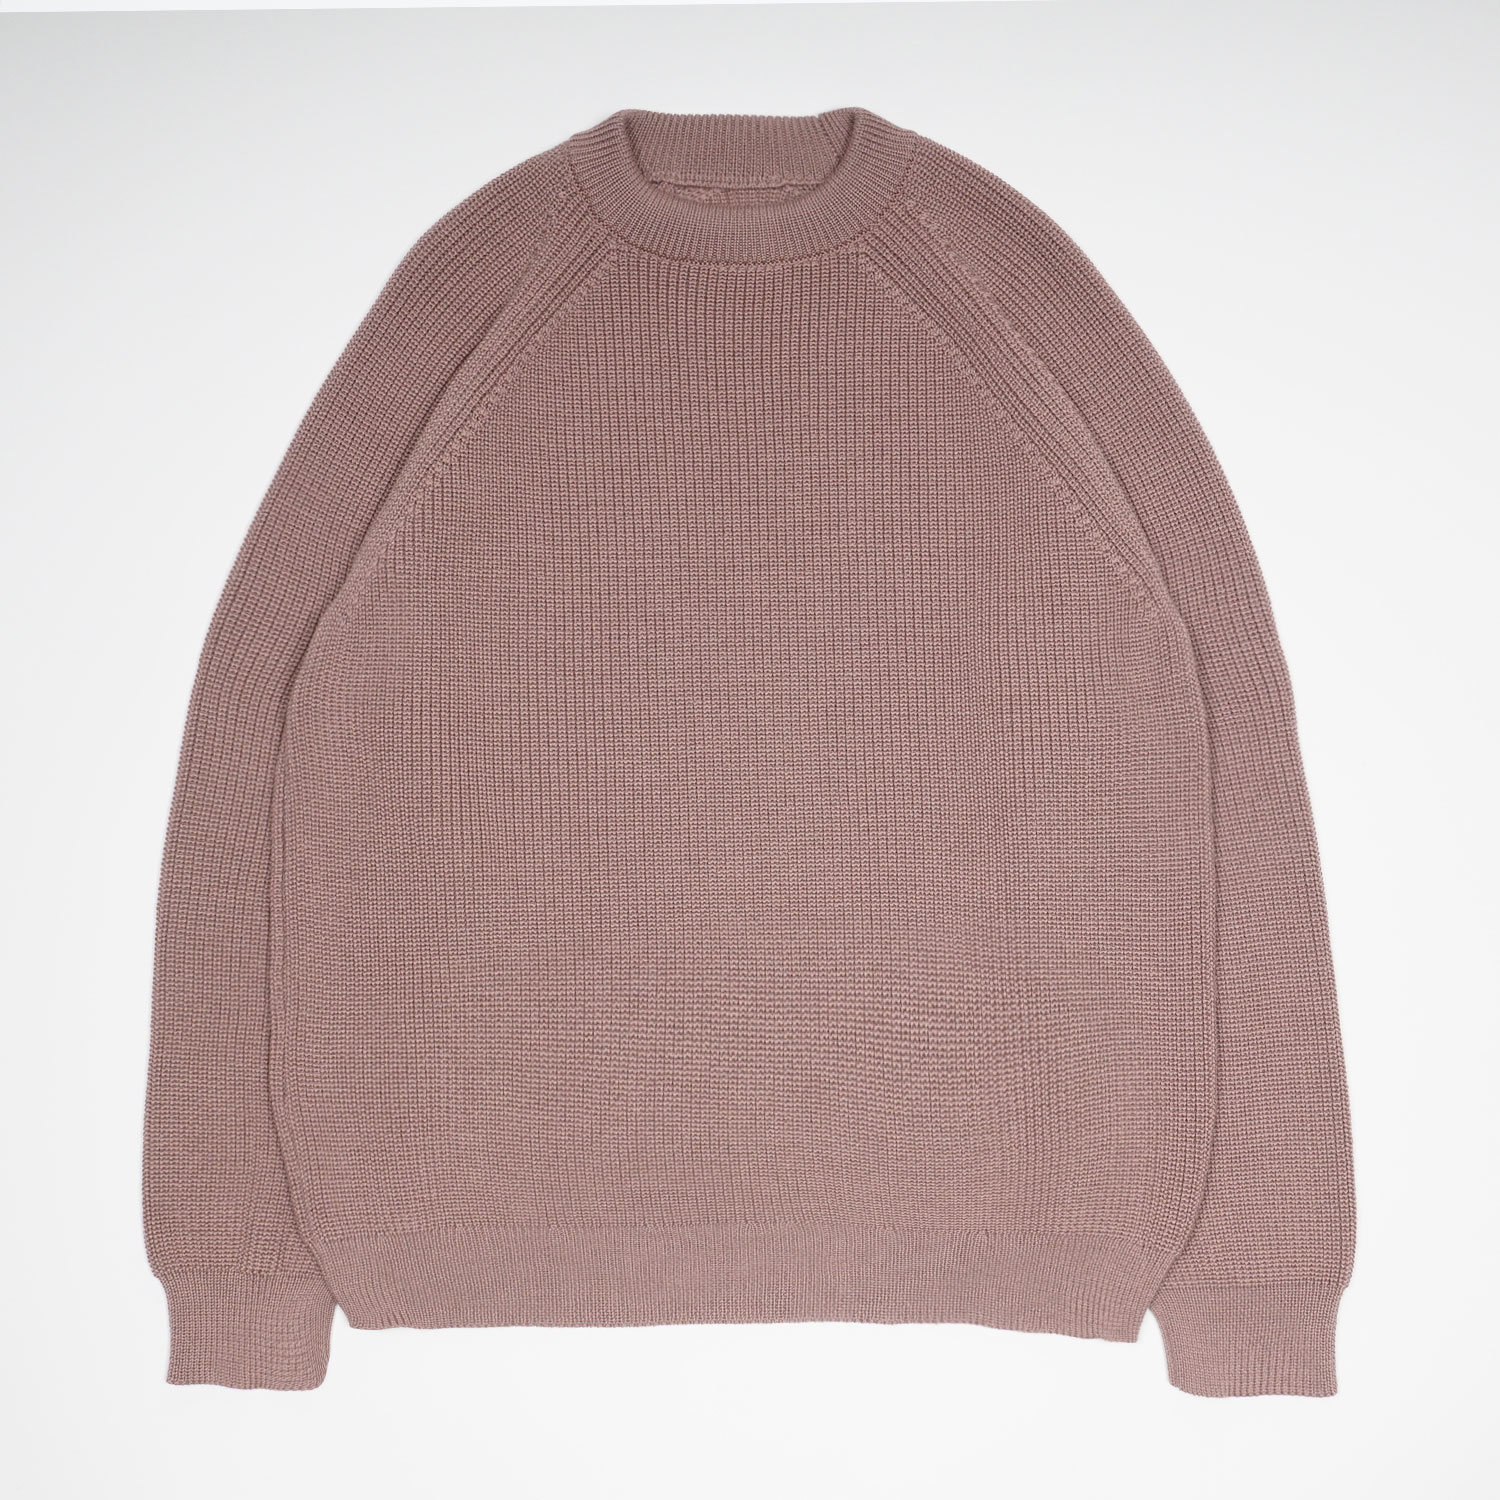 PLANO in Raspberry grey by Arpenteur